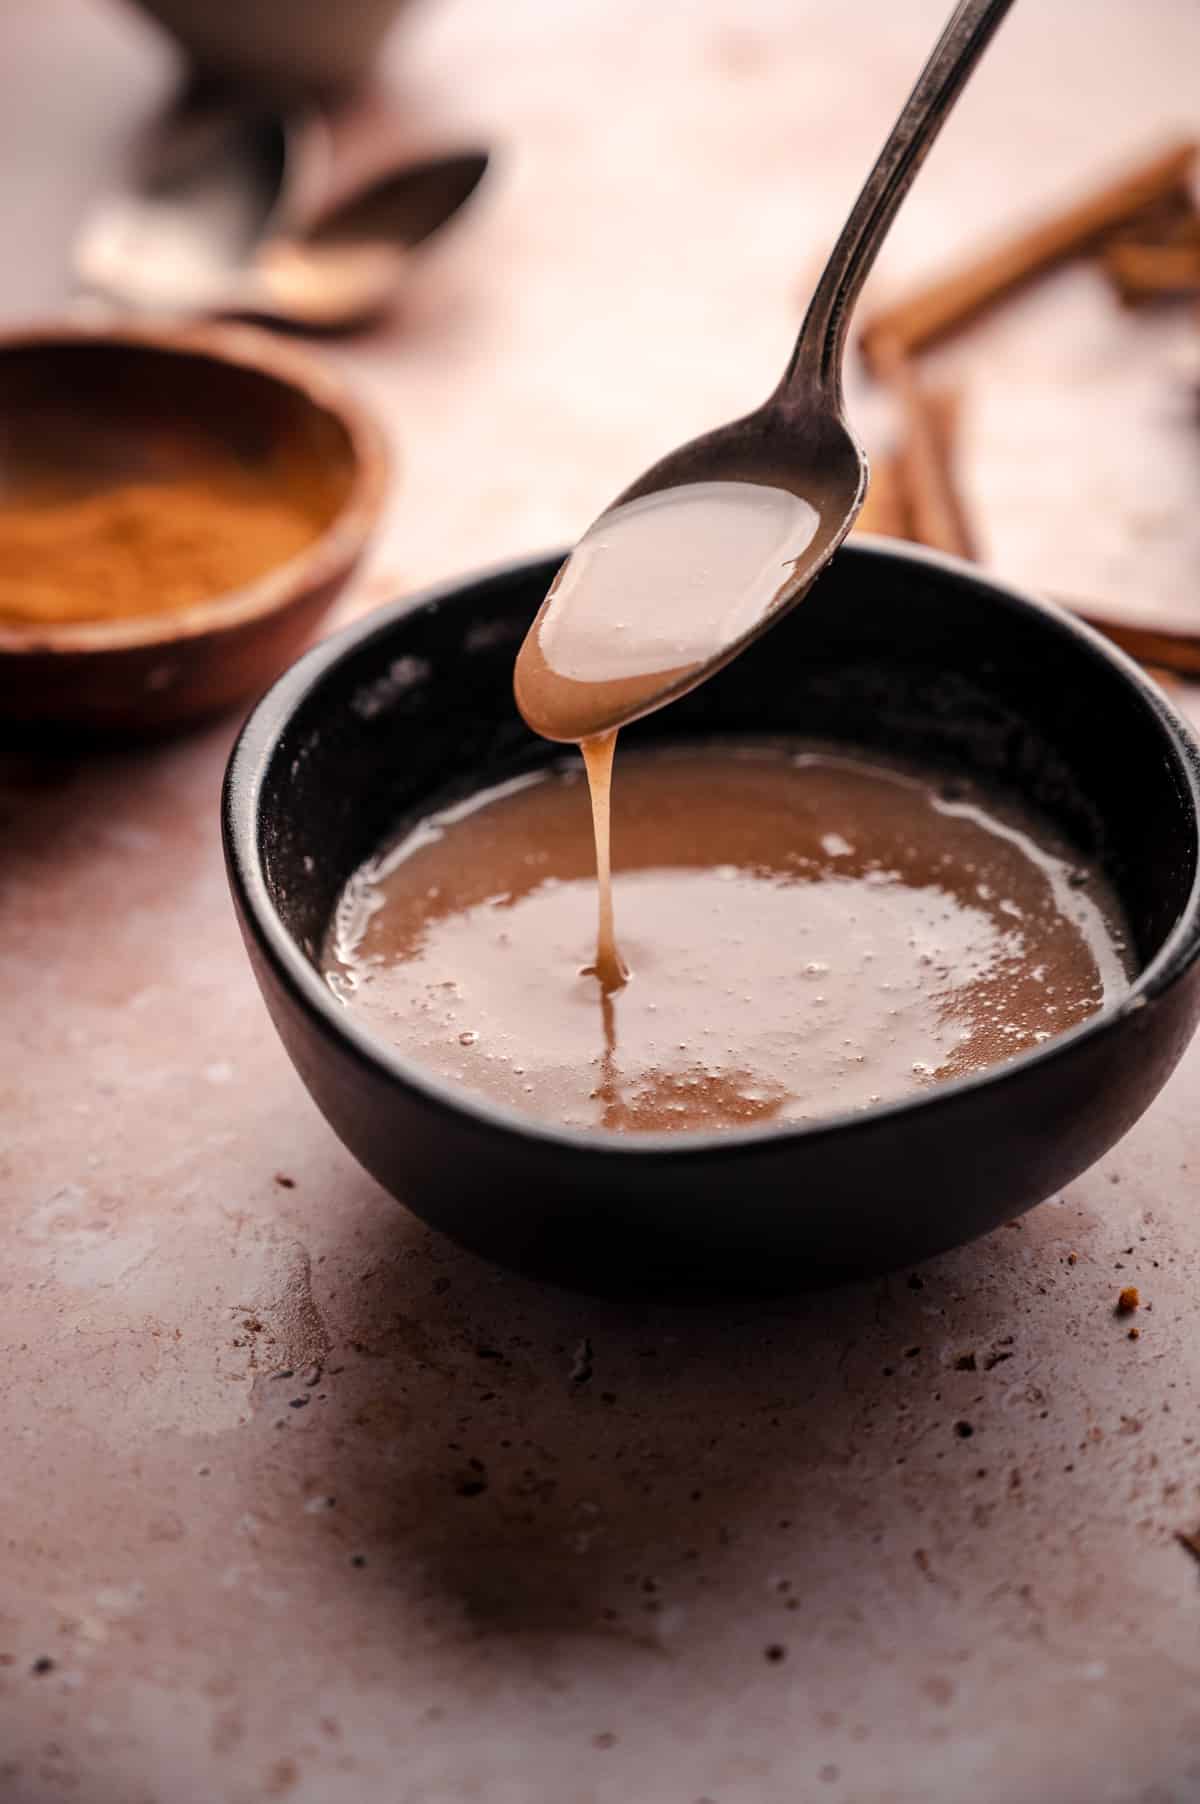 Bowl of cinnamon glaze with a spoon drizzling it into the bowl.